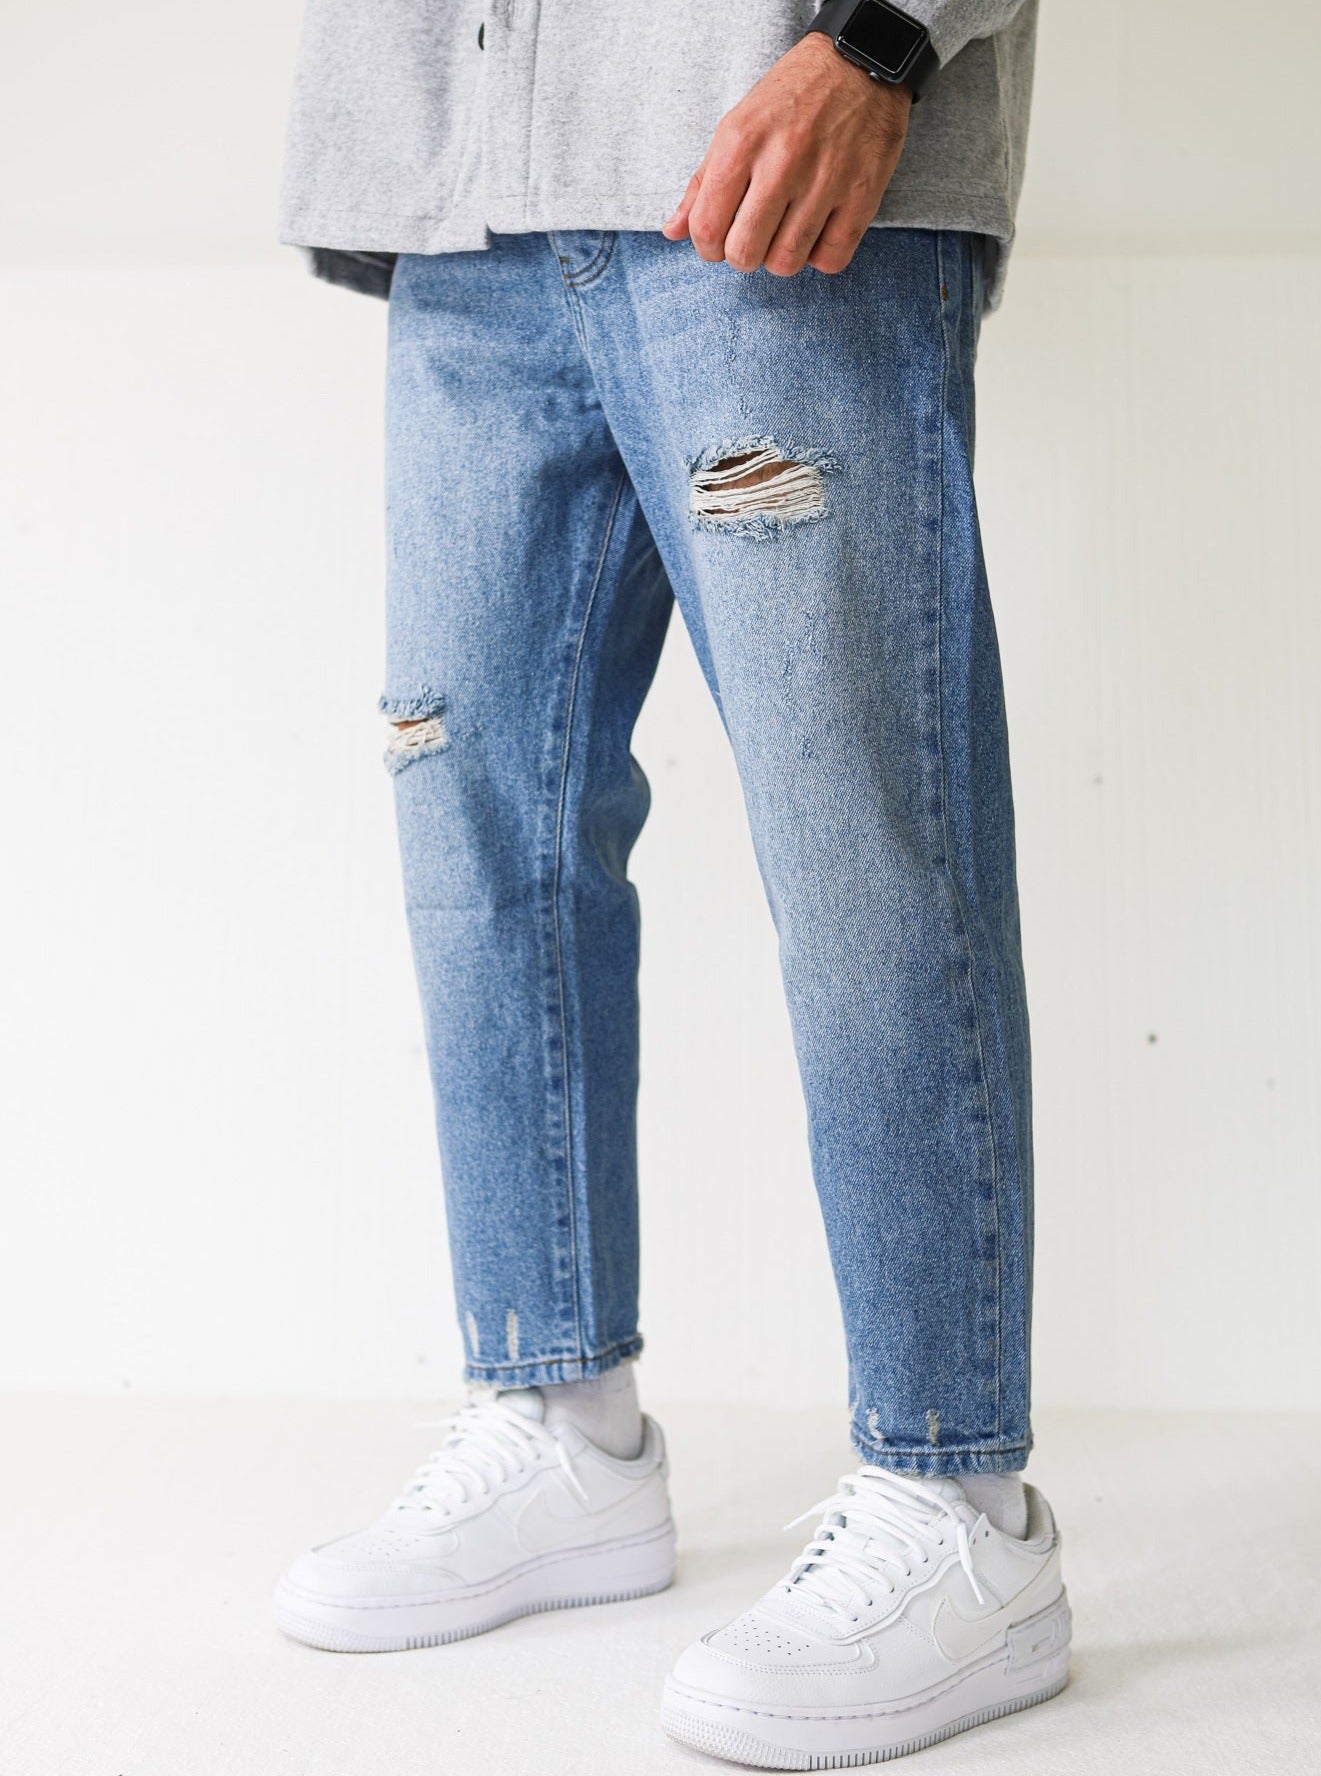 Relaxed Fit Ripped Vintage Blue Jeans - UNEFFECTED STUDIOS® - JEANS - UNEFFECTED STUDIOS®